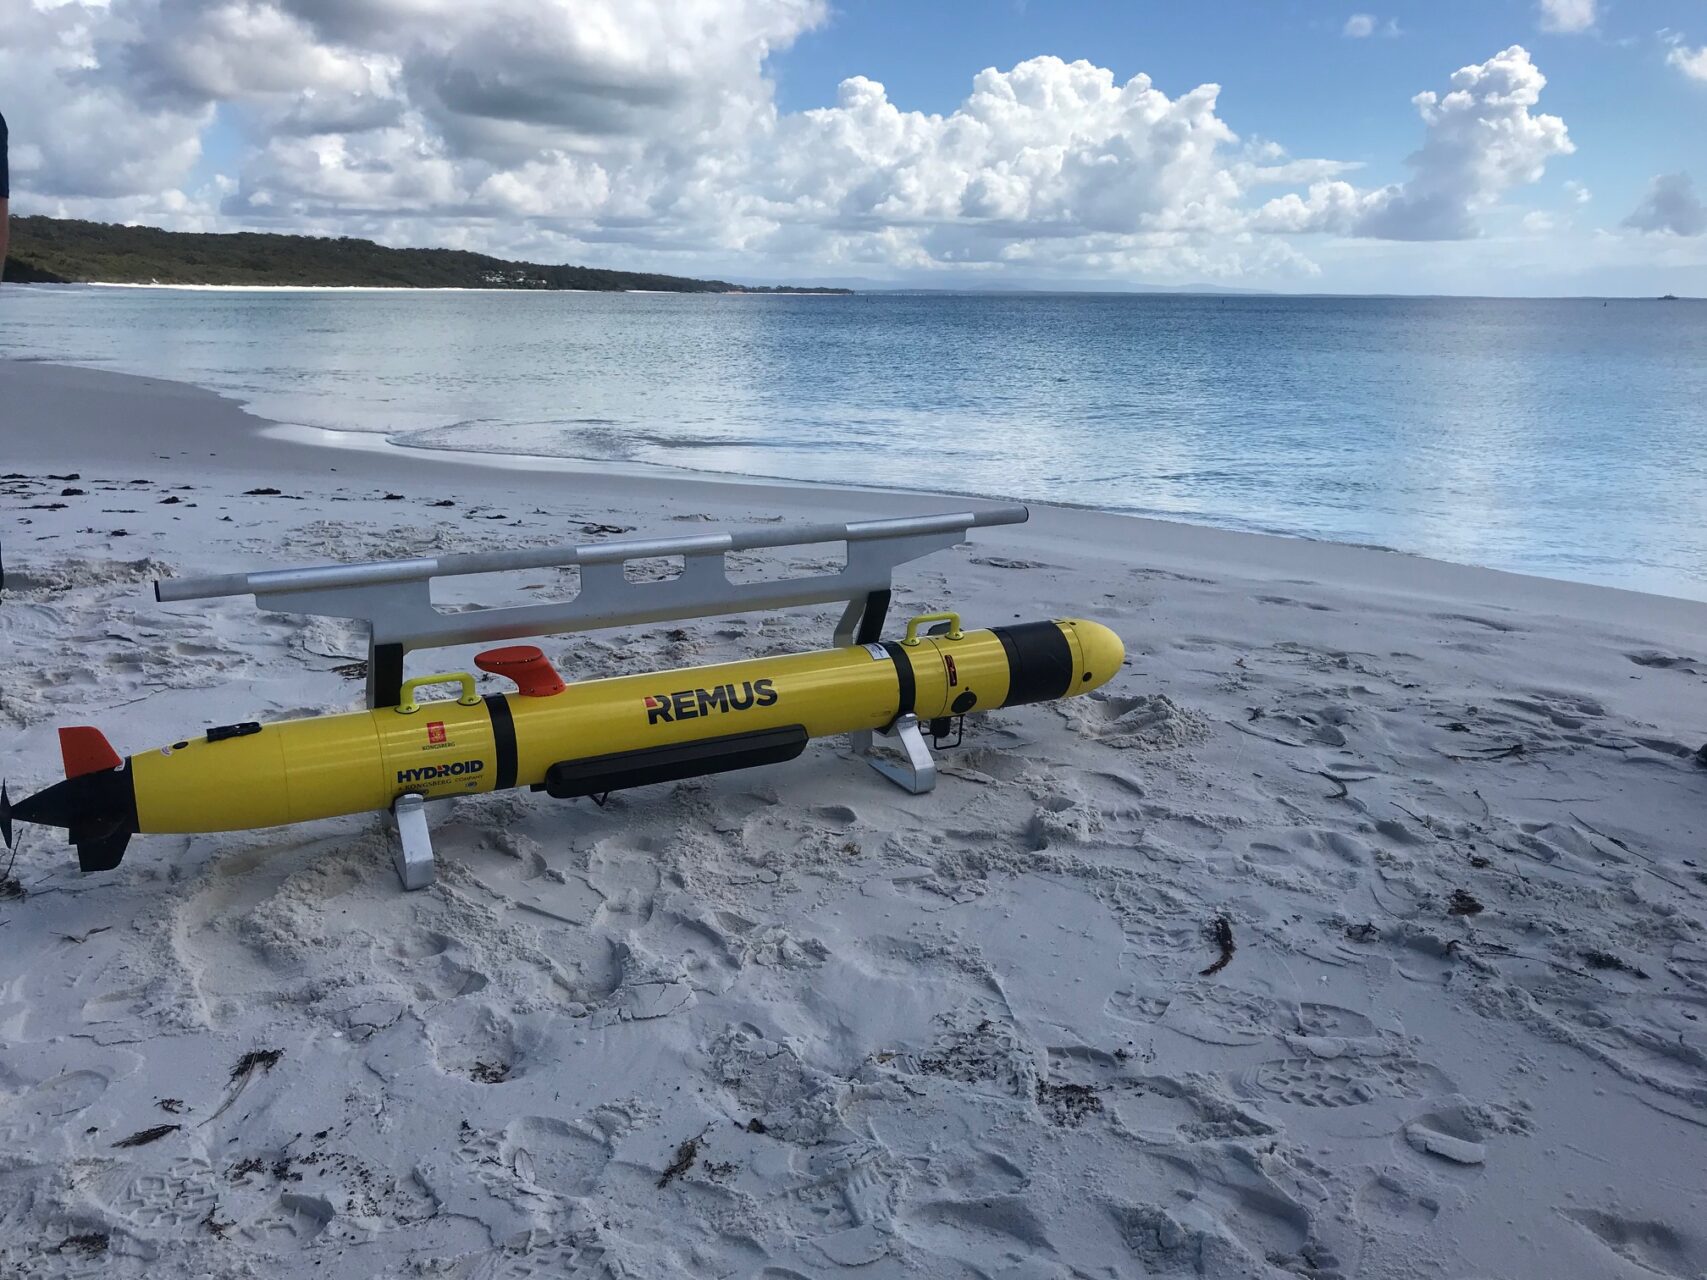 REMUS Automated Target Recognition Trial at Jervis Bay